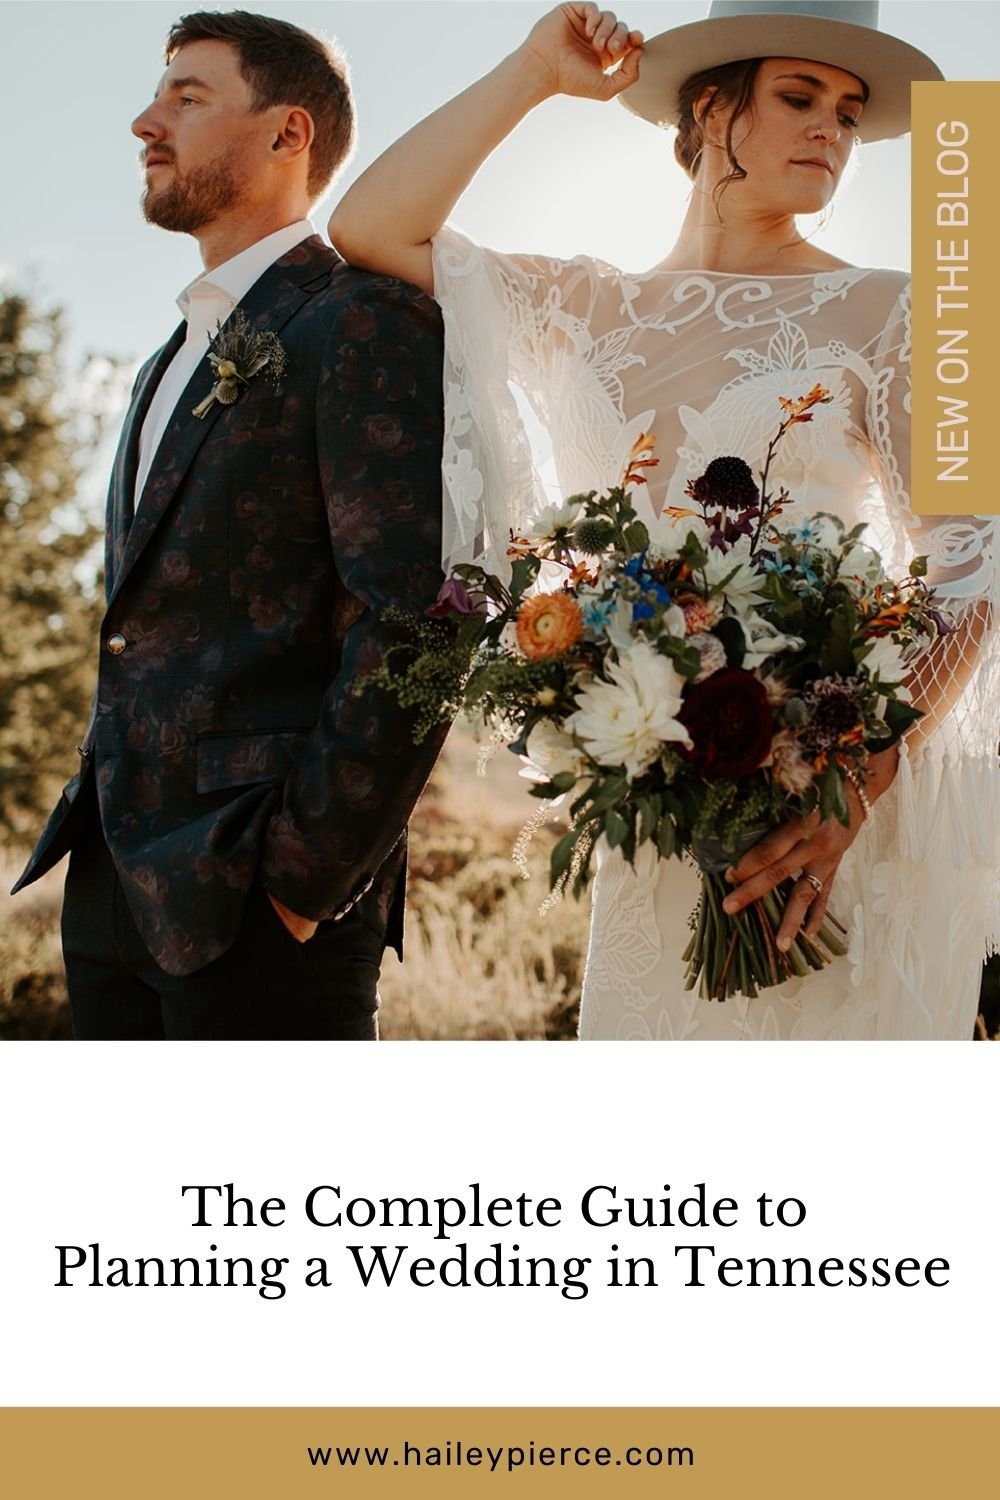 complete-guide-to-planning-wedding-tennesse2.jpg